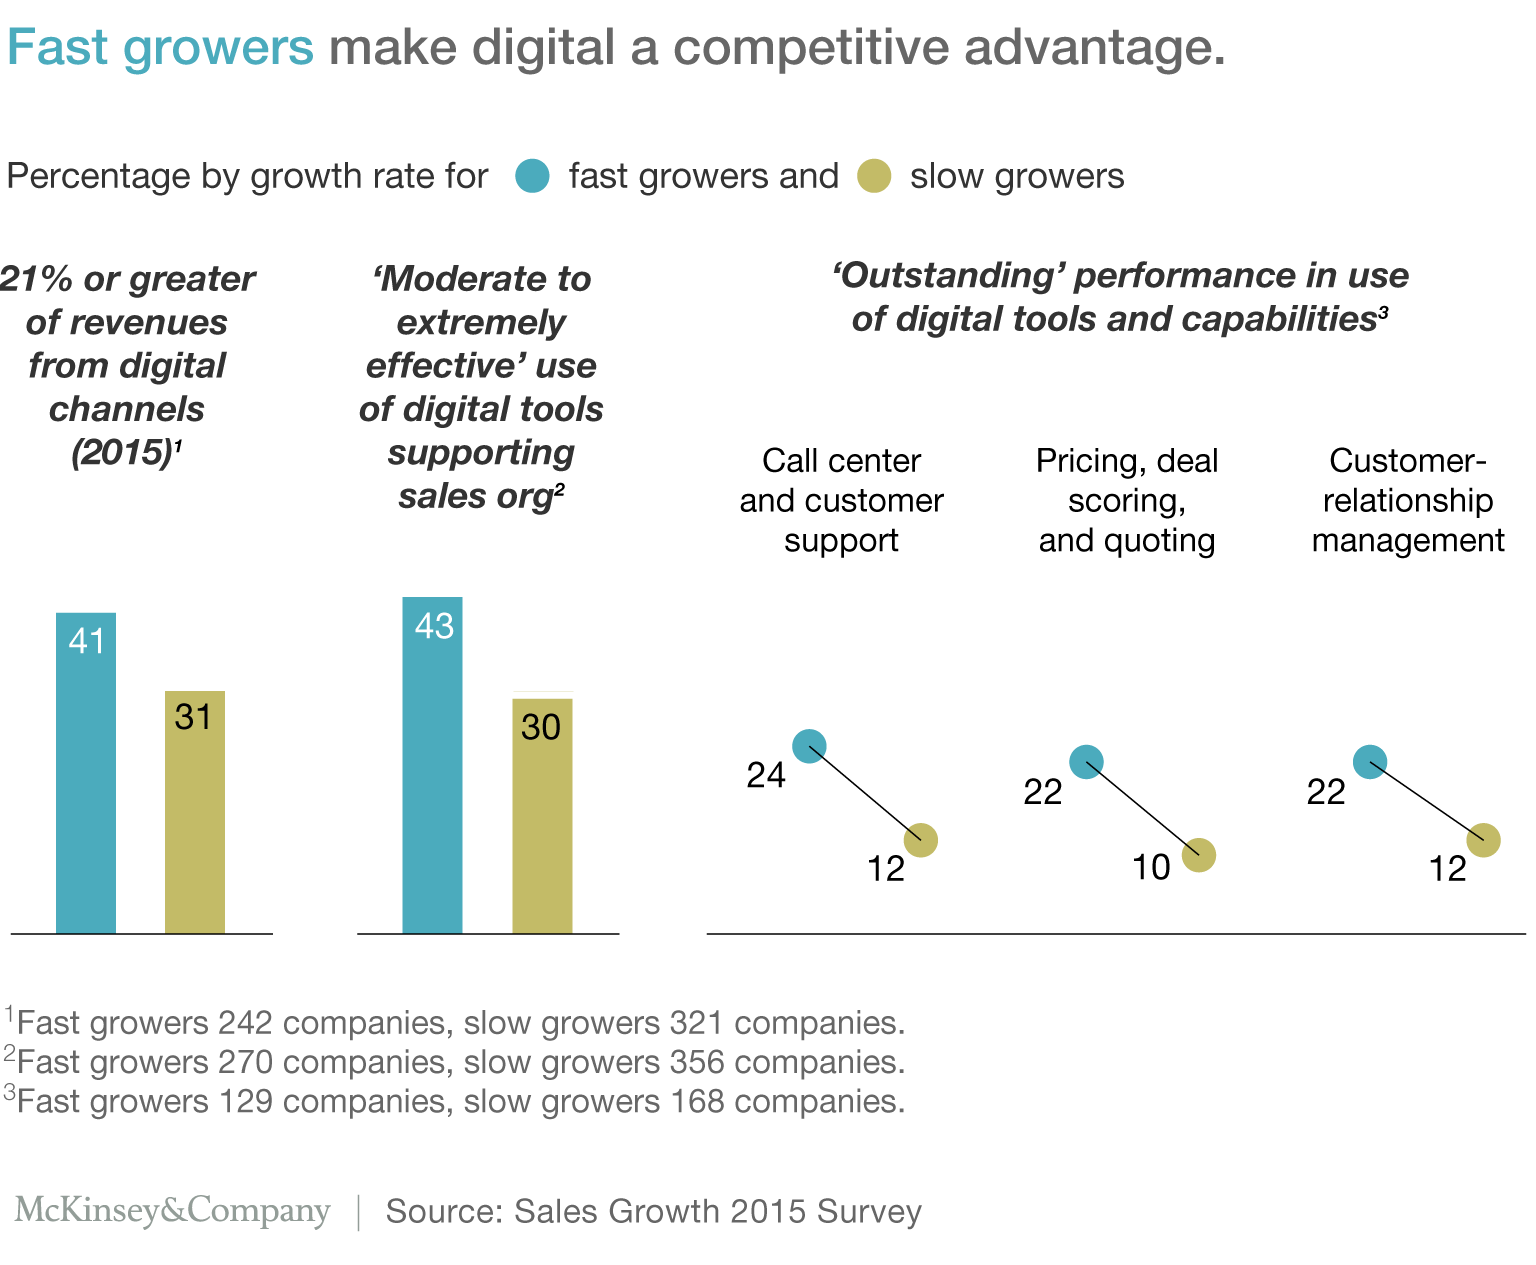 Exhibit 2: Fast growers make digital a competitive advantage